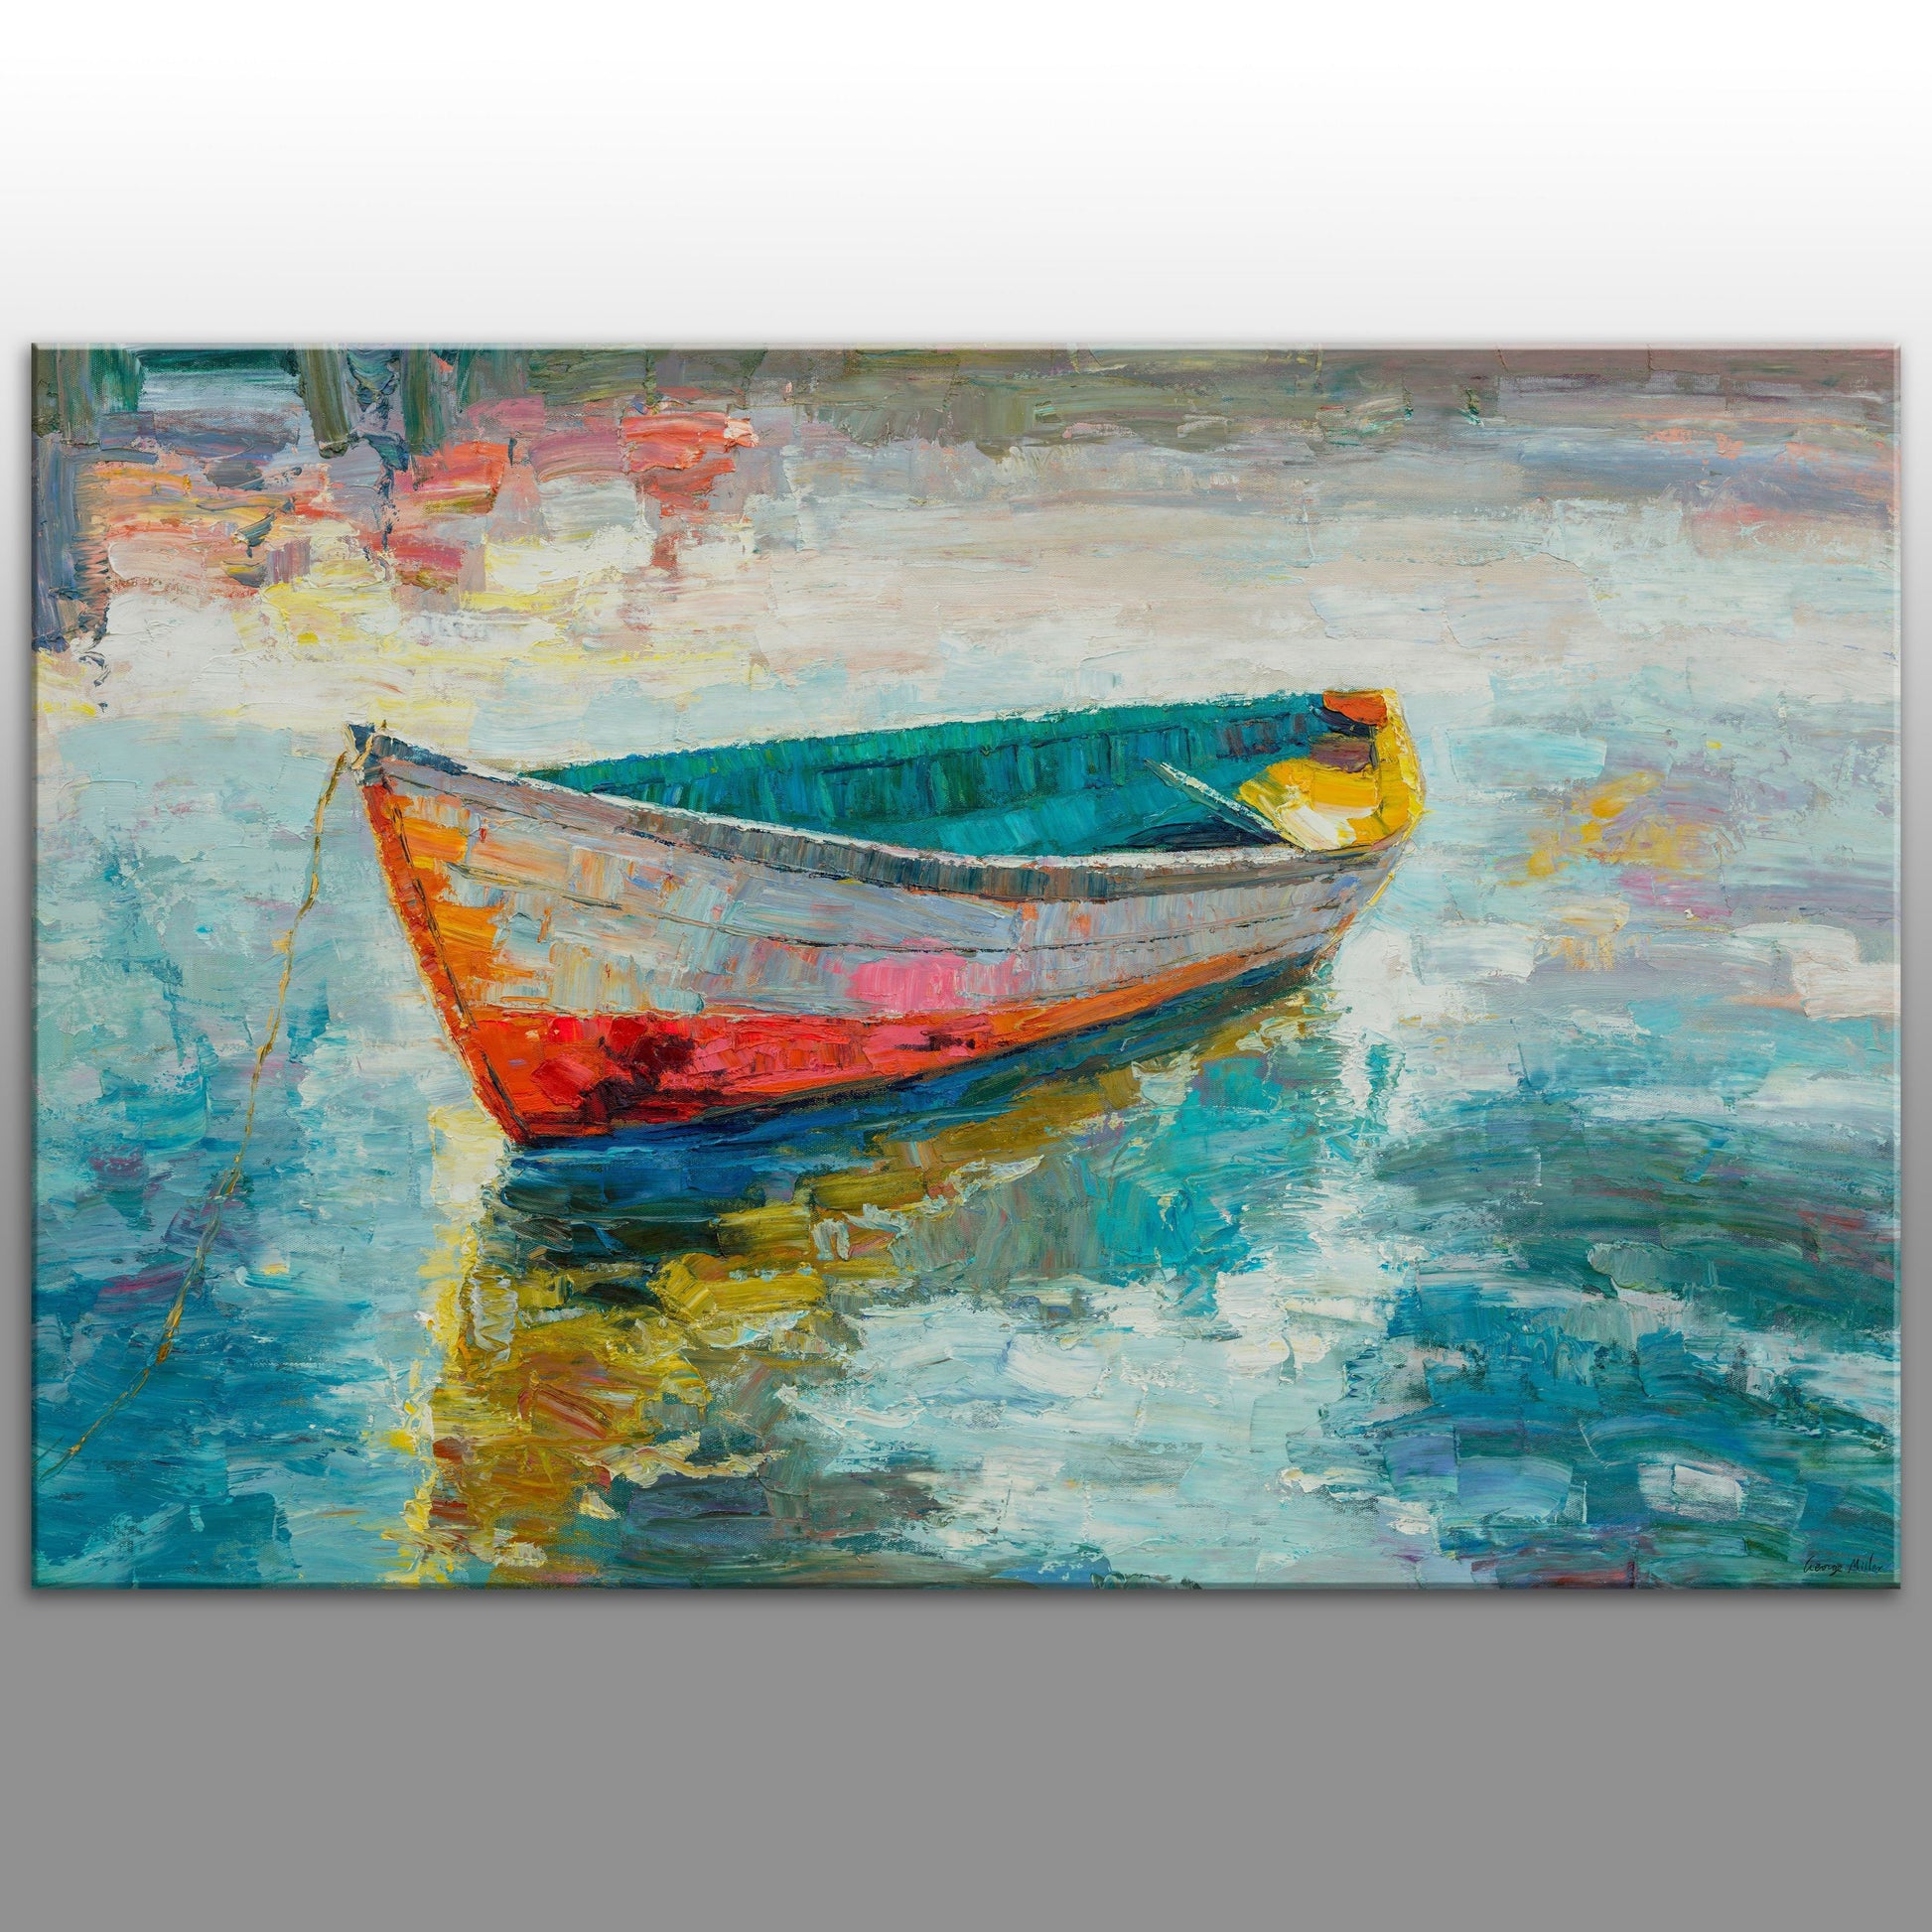 Seascape Oil Painting: Fishing Boat | Large Wall Art | Contemporary |  Original 32x48, Large Wall Art Canvas, Abstract Painting